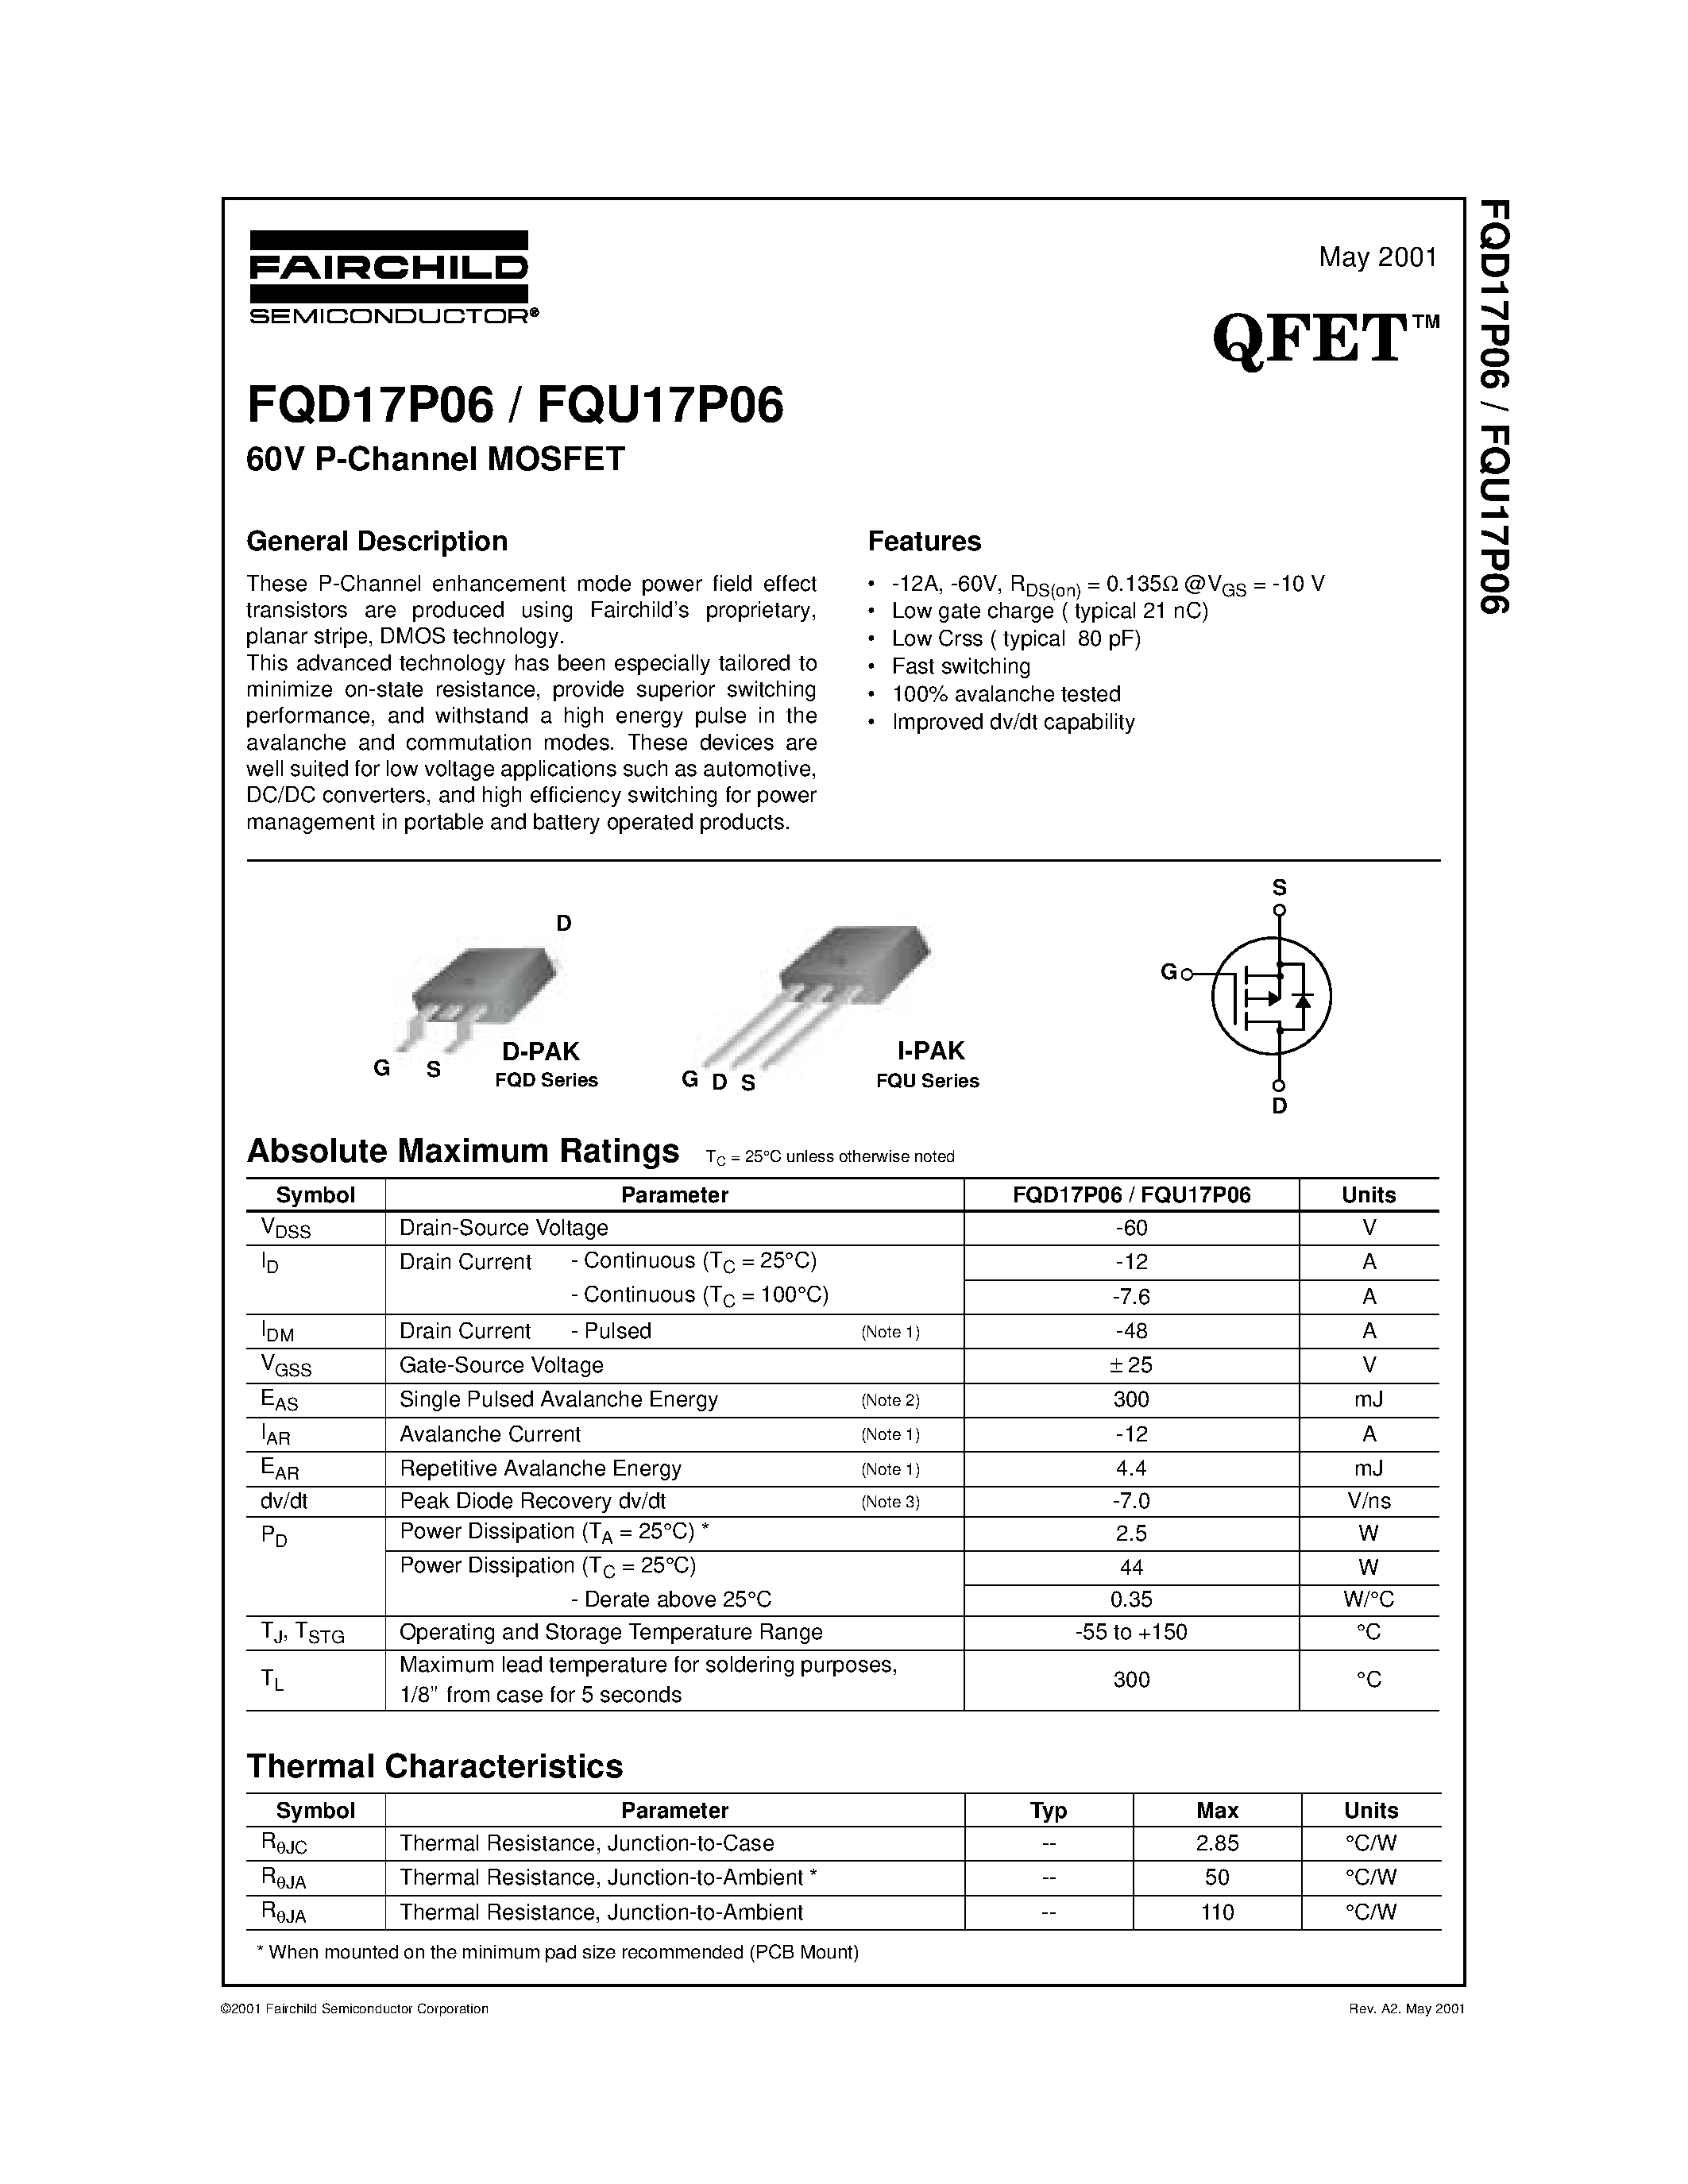 Datasheet FQD17P06 - 60V P-Channel MOSFET page 1